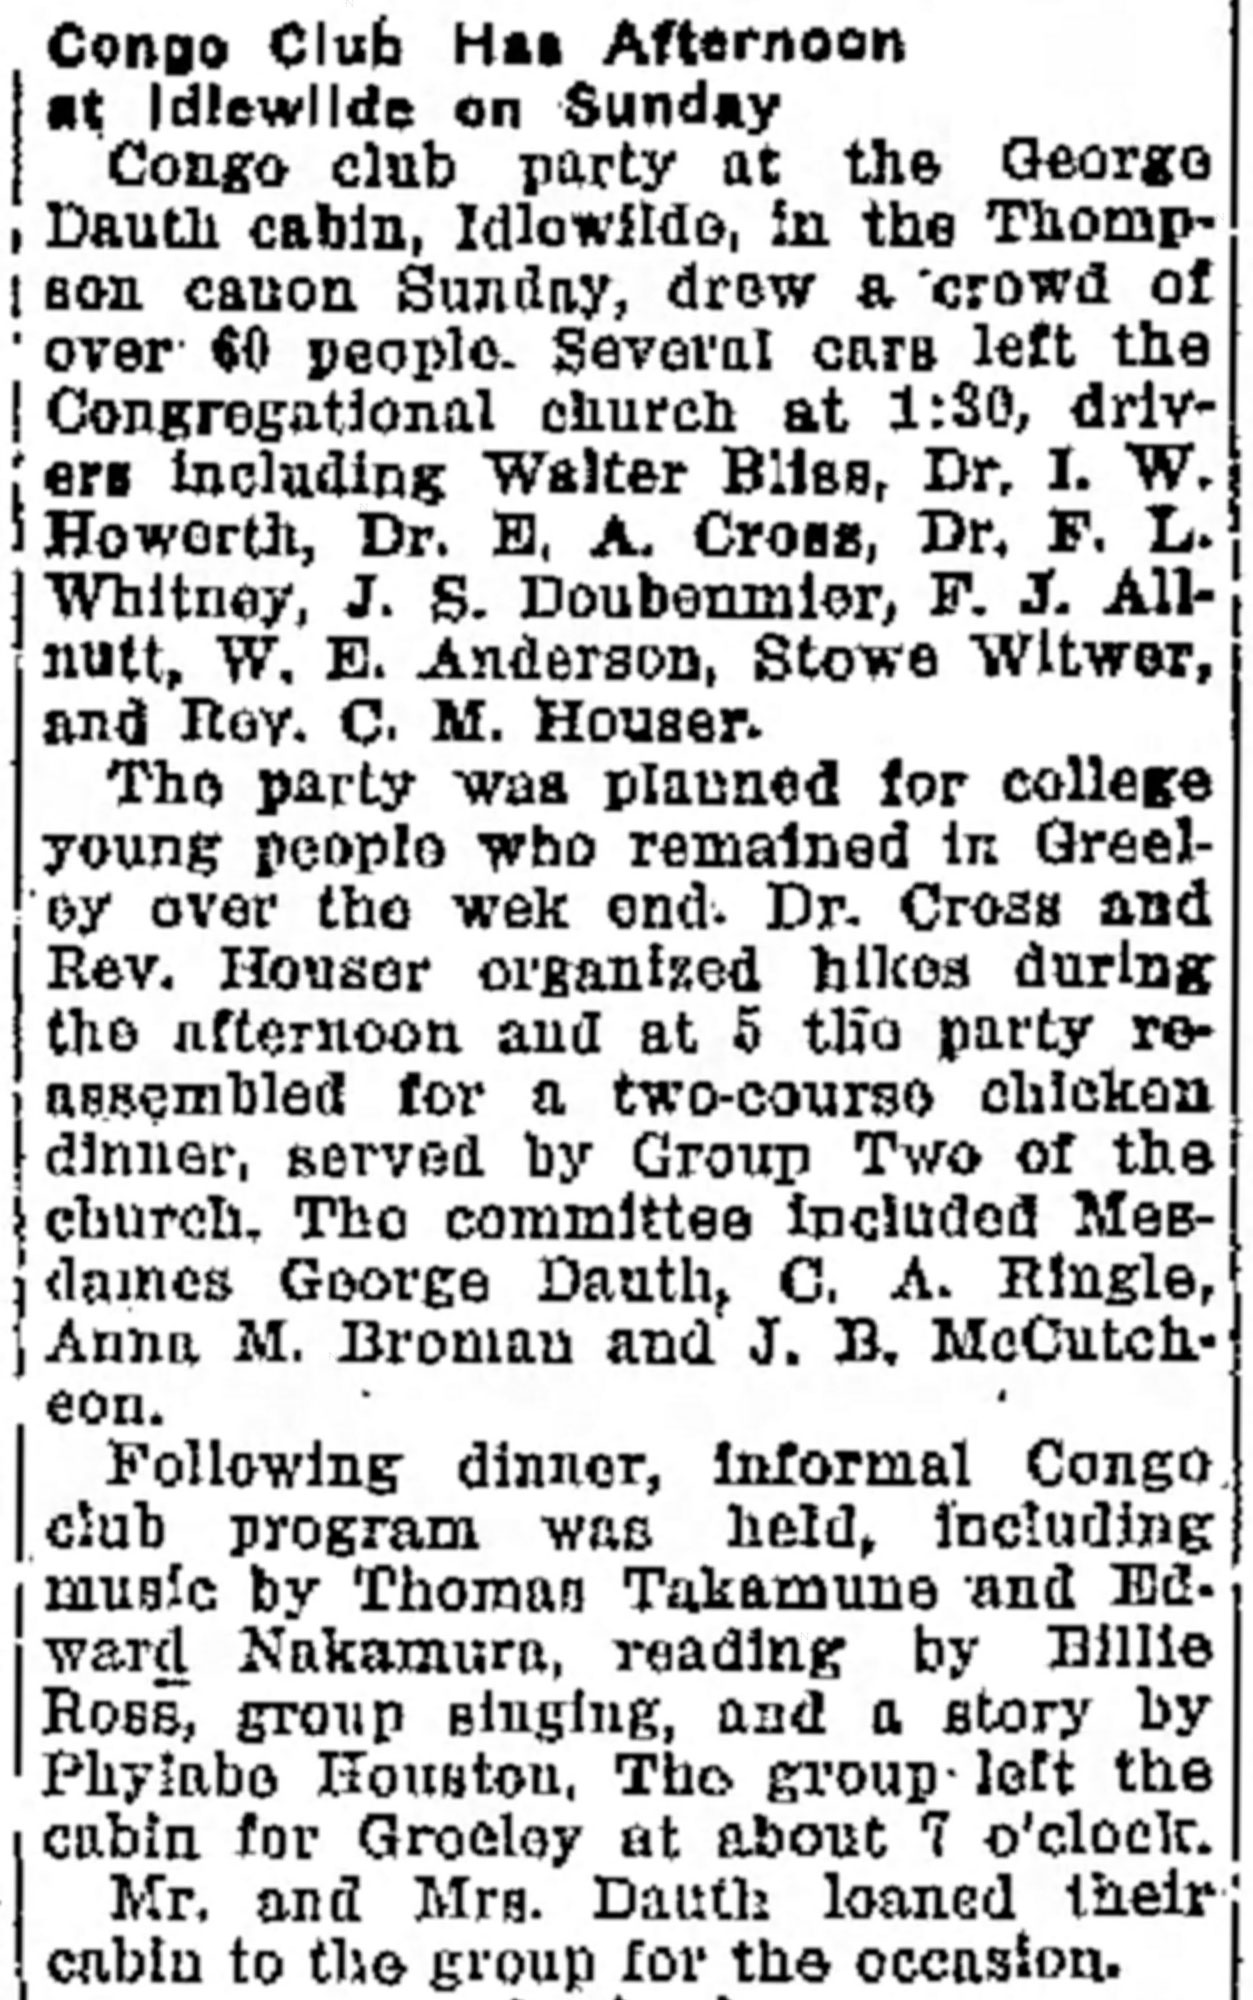 Dauth Family Archive - 1931-11-03 - Greeley Daily Tribune - Florence Dauth Hosts Congo Club At Idlewild Lodge